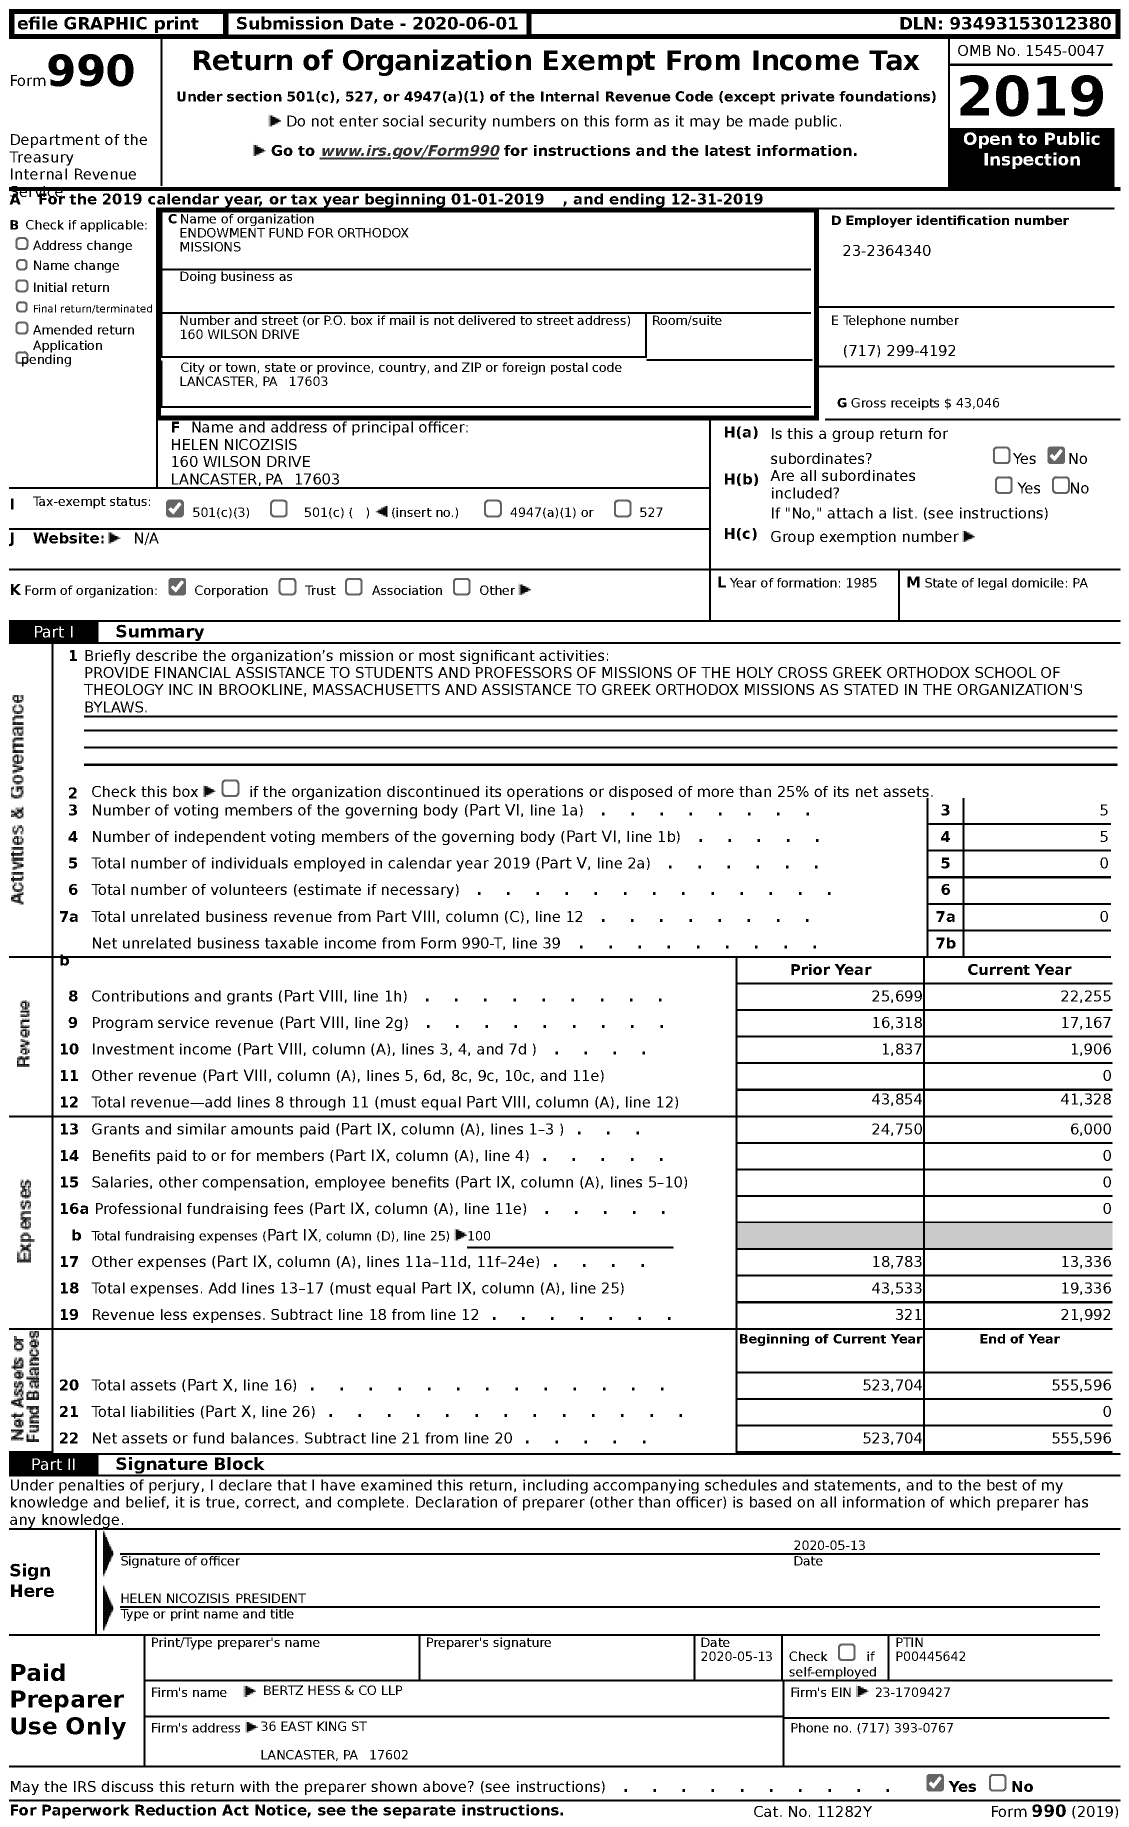 Image of first page of 2019 Form 990 for Endowment Fund for Orthodox Missions